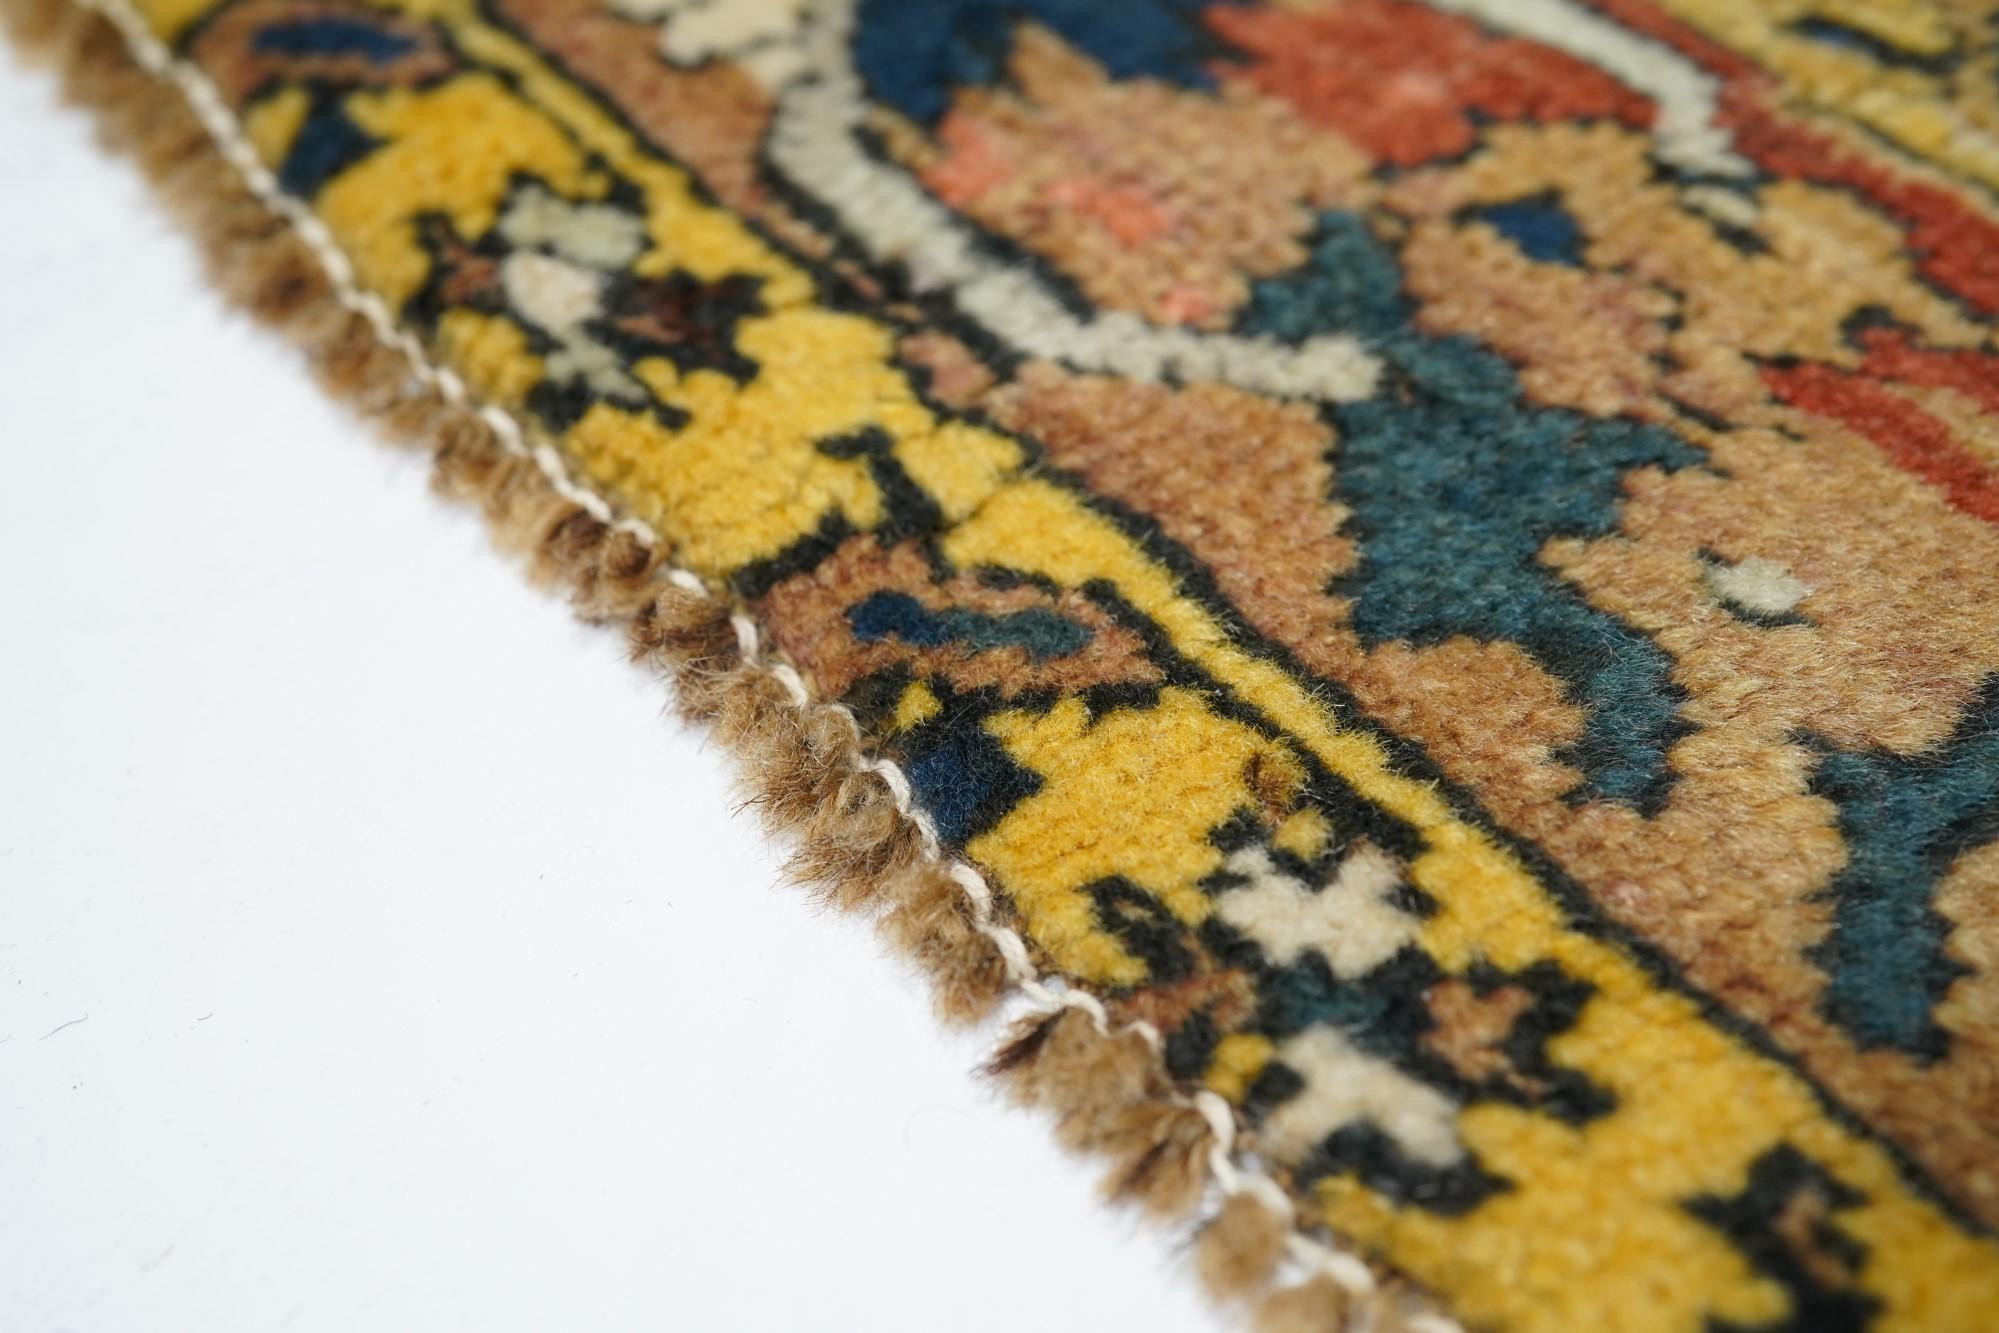 Late 19th Century North West Persian Rug For Sale